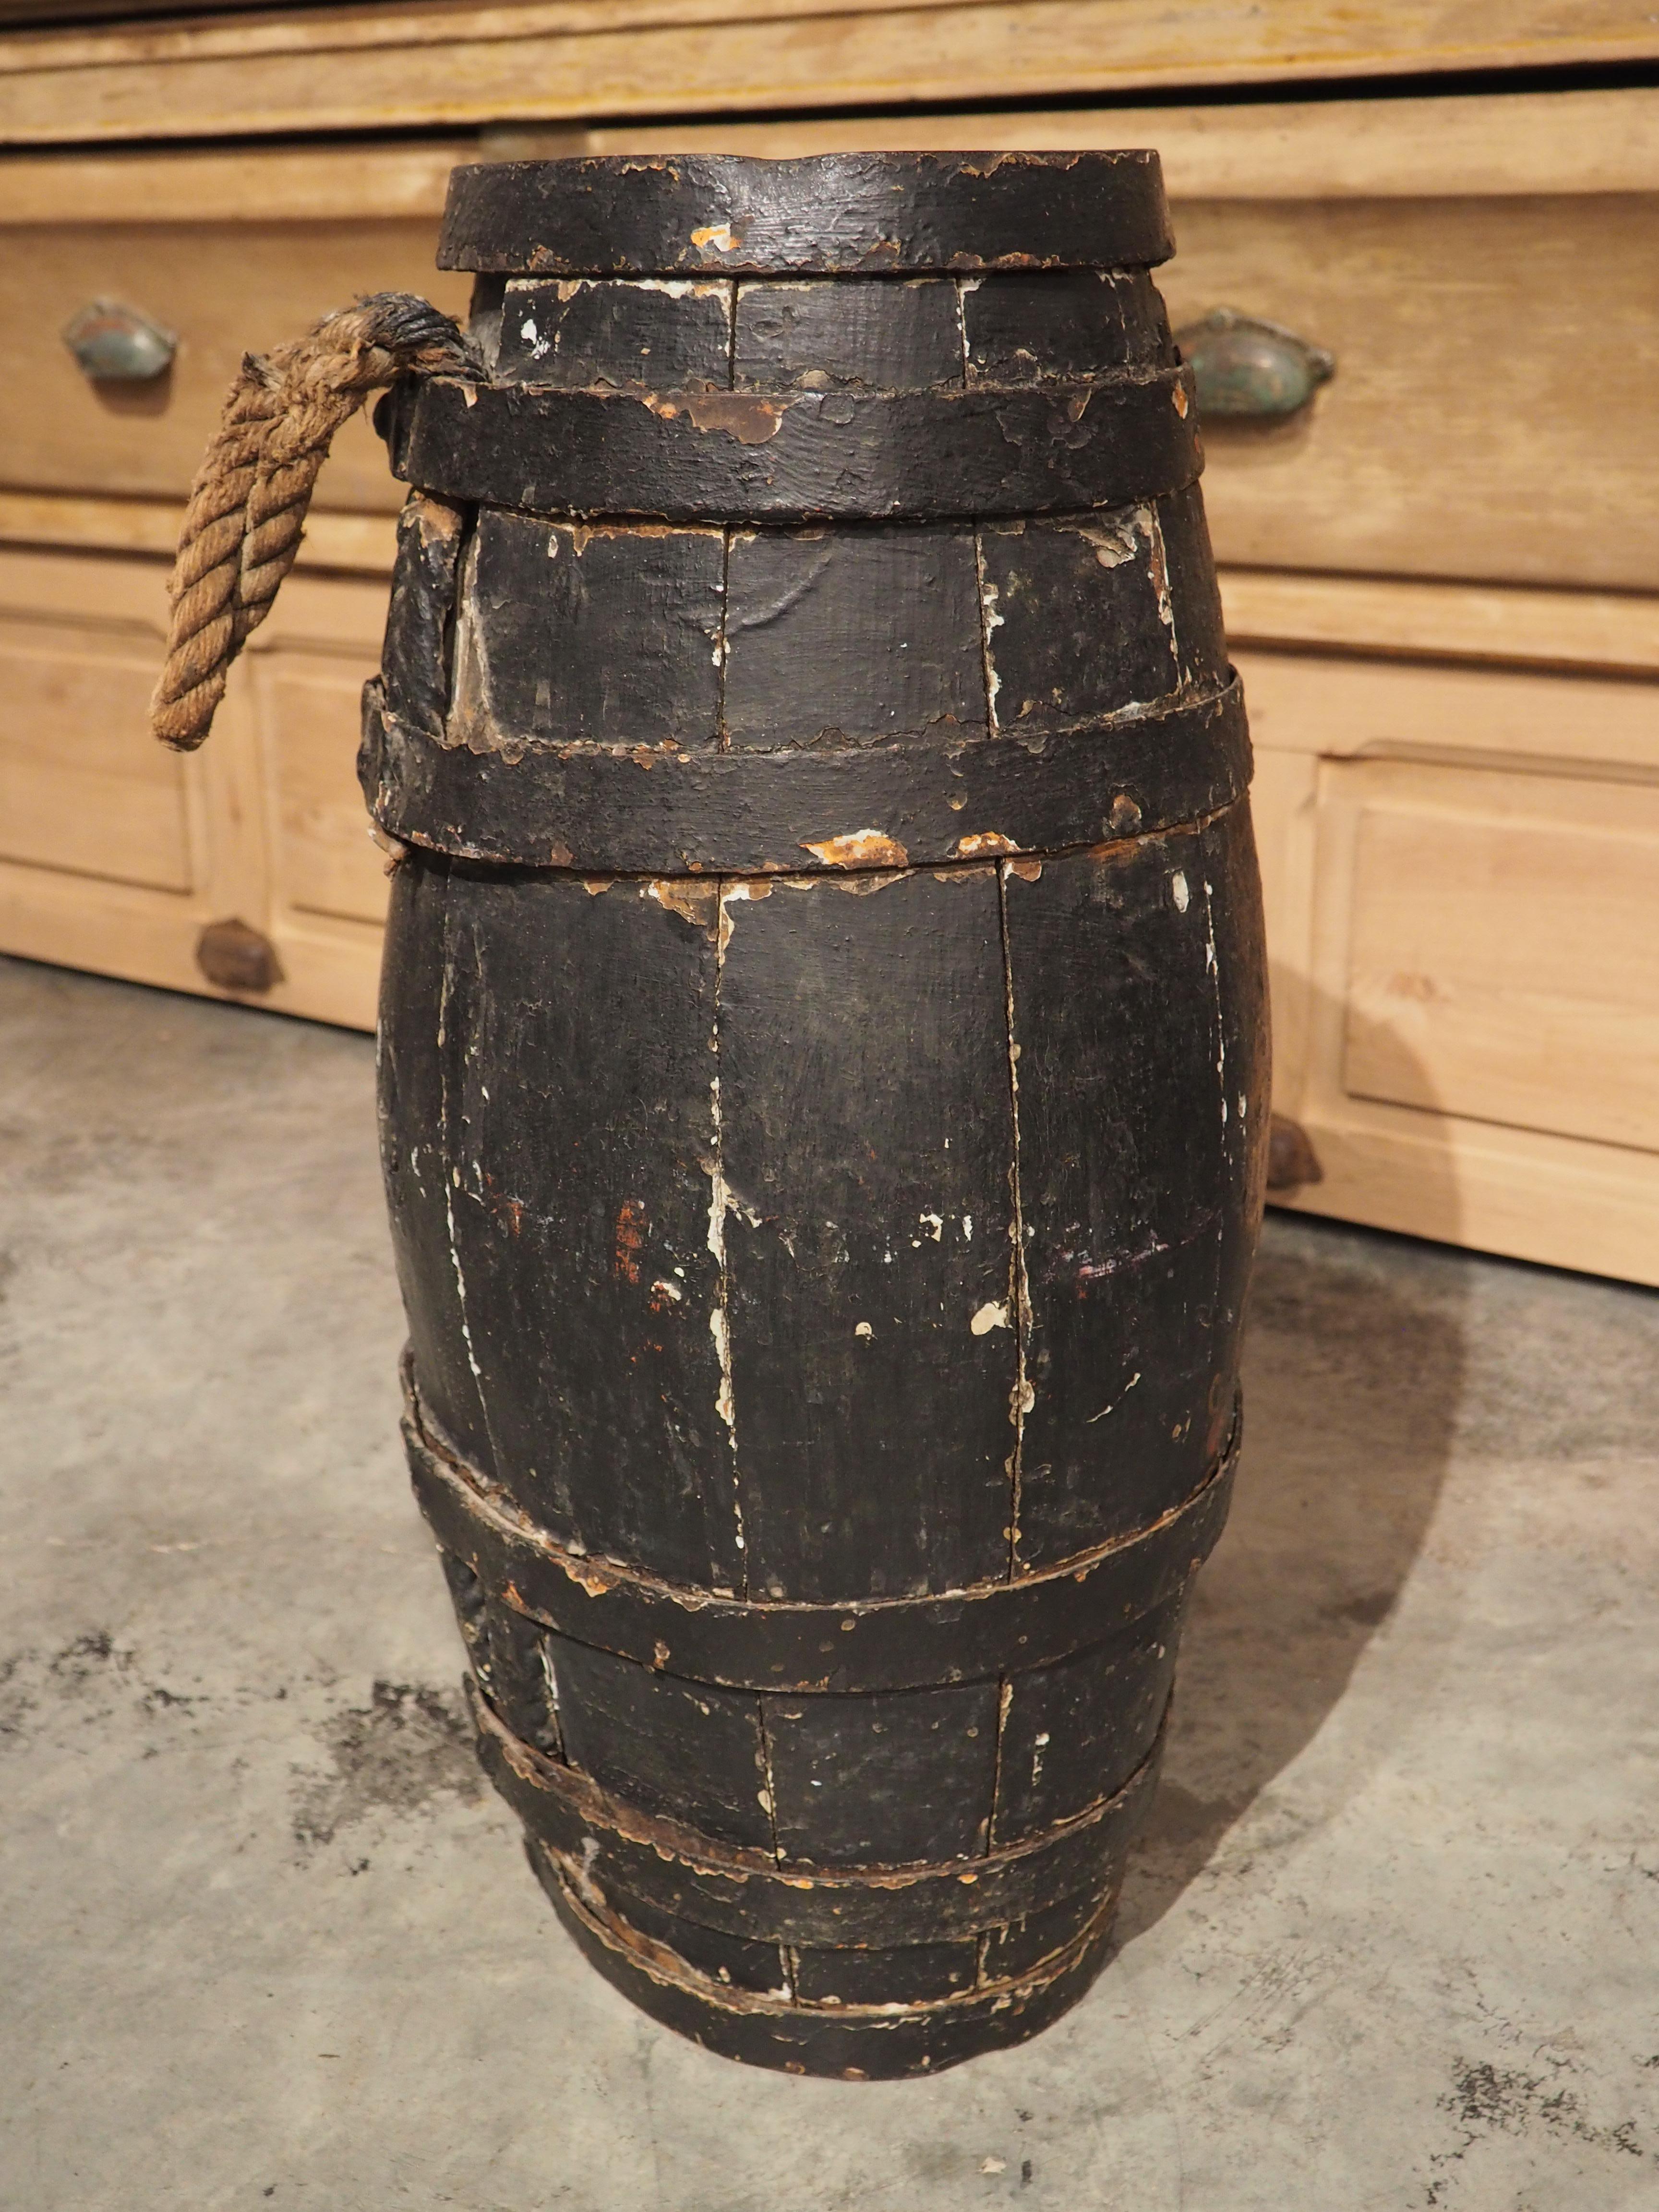 Crafted during the 1700s, this oak barrel features a hand-painted version of the Royal coat of arms of the United Kingdom. The barrel would have most likely been used on a naval ship, either to store gun powder or for serving grog, which was rum